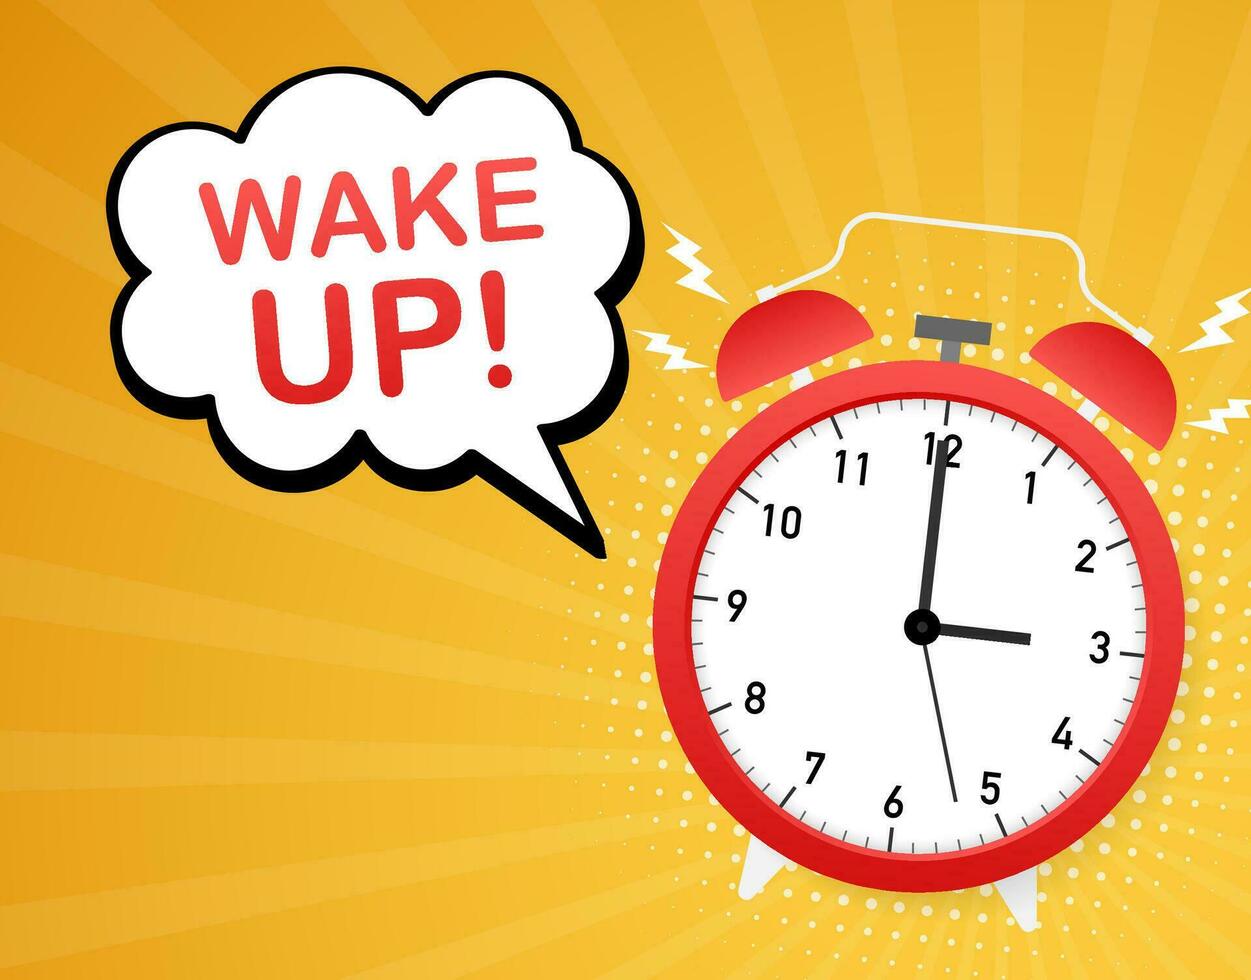 Wake up poster with alarm clock. Vector illustration.